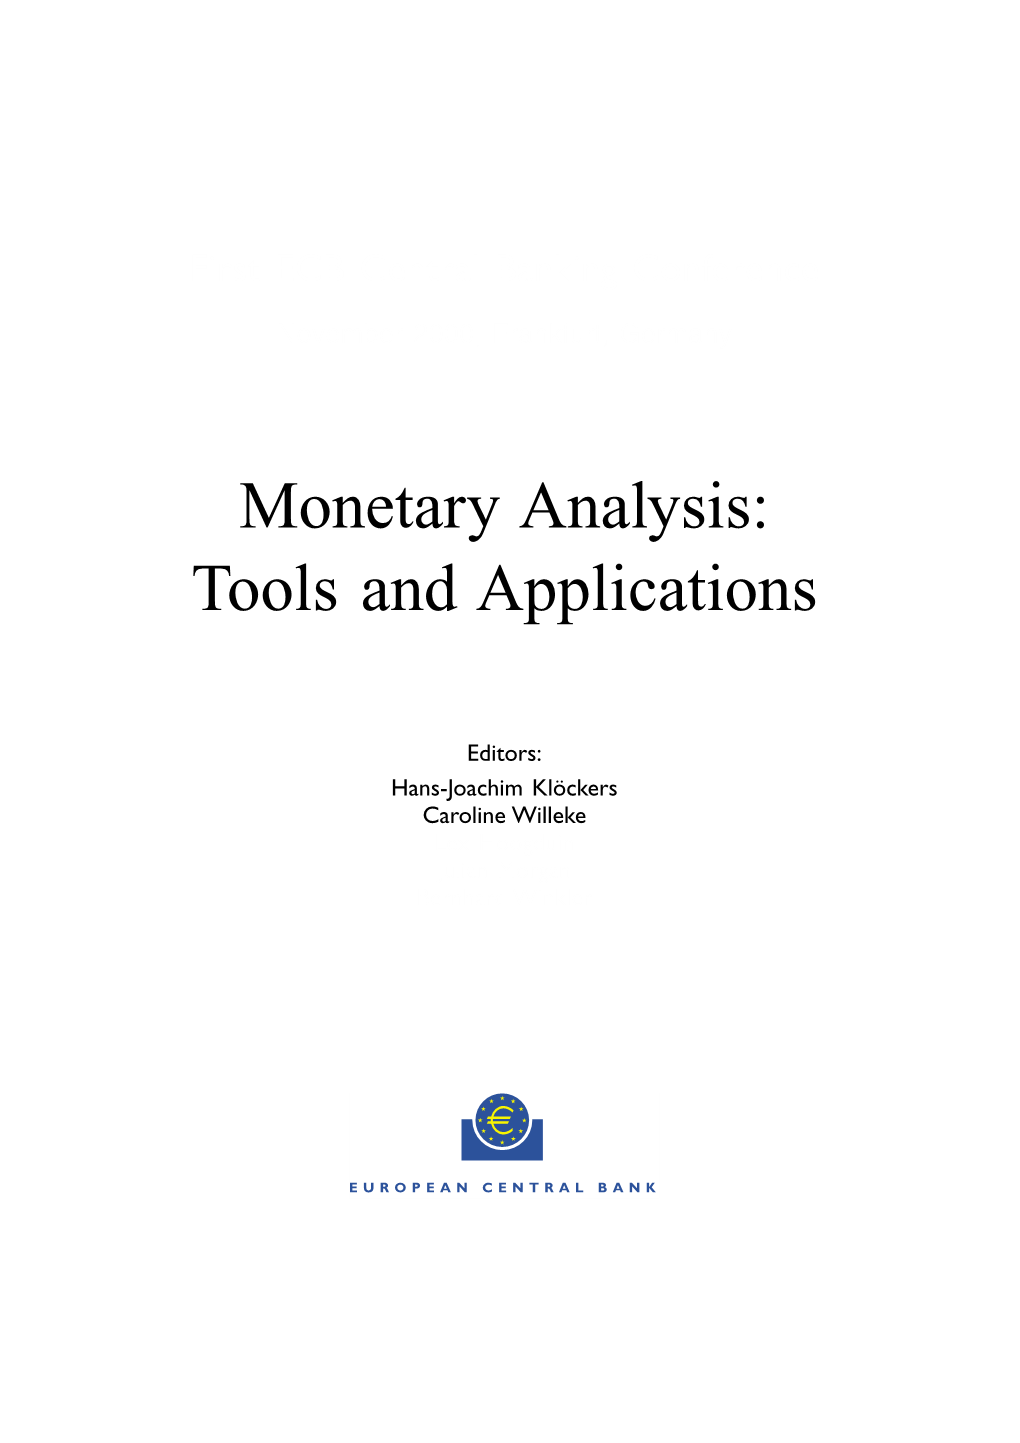 Monetary Analysis: Tools and Applications